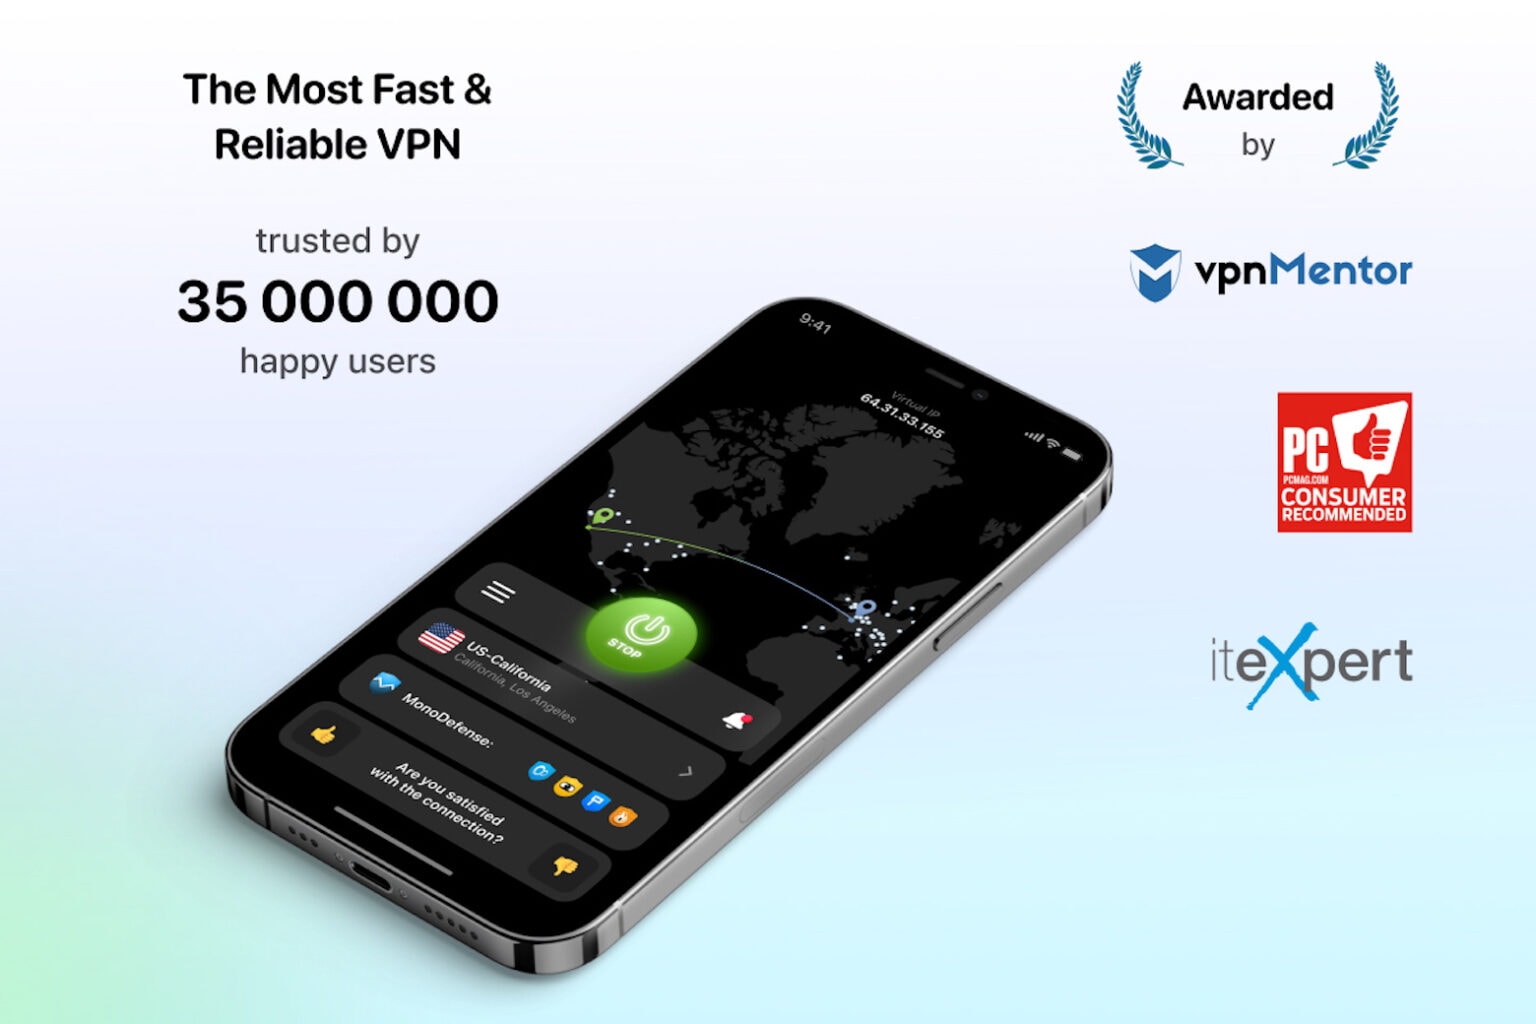 Get access to over 3,000 secure servers through this top VPN.